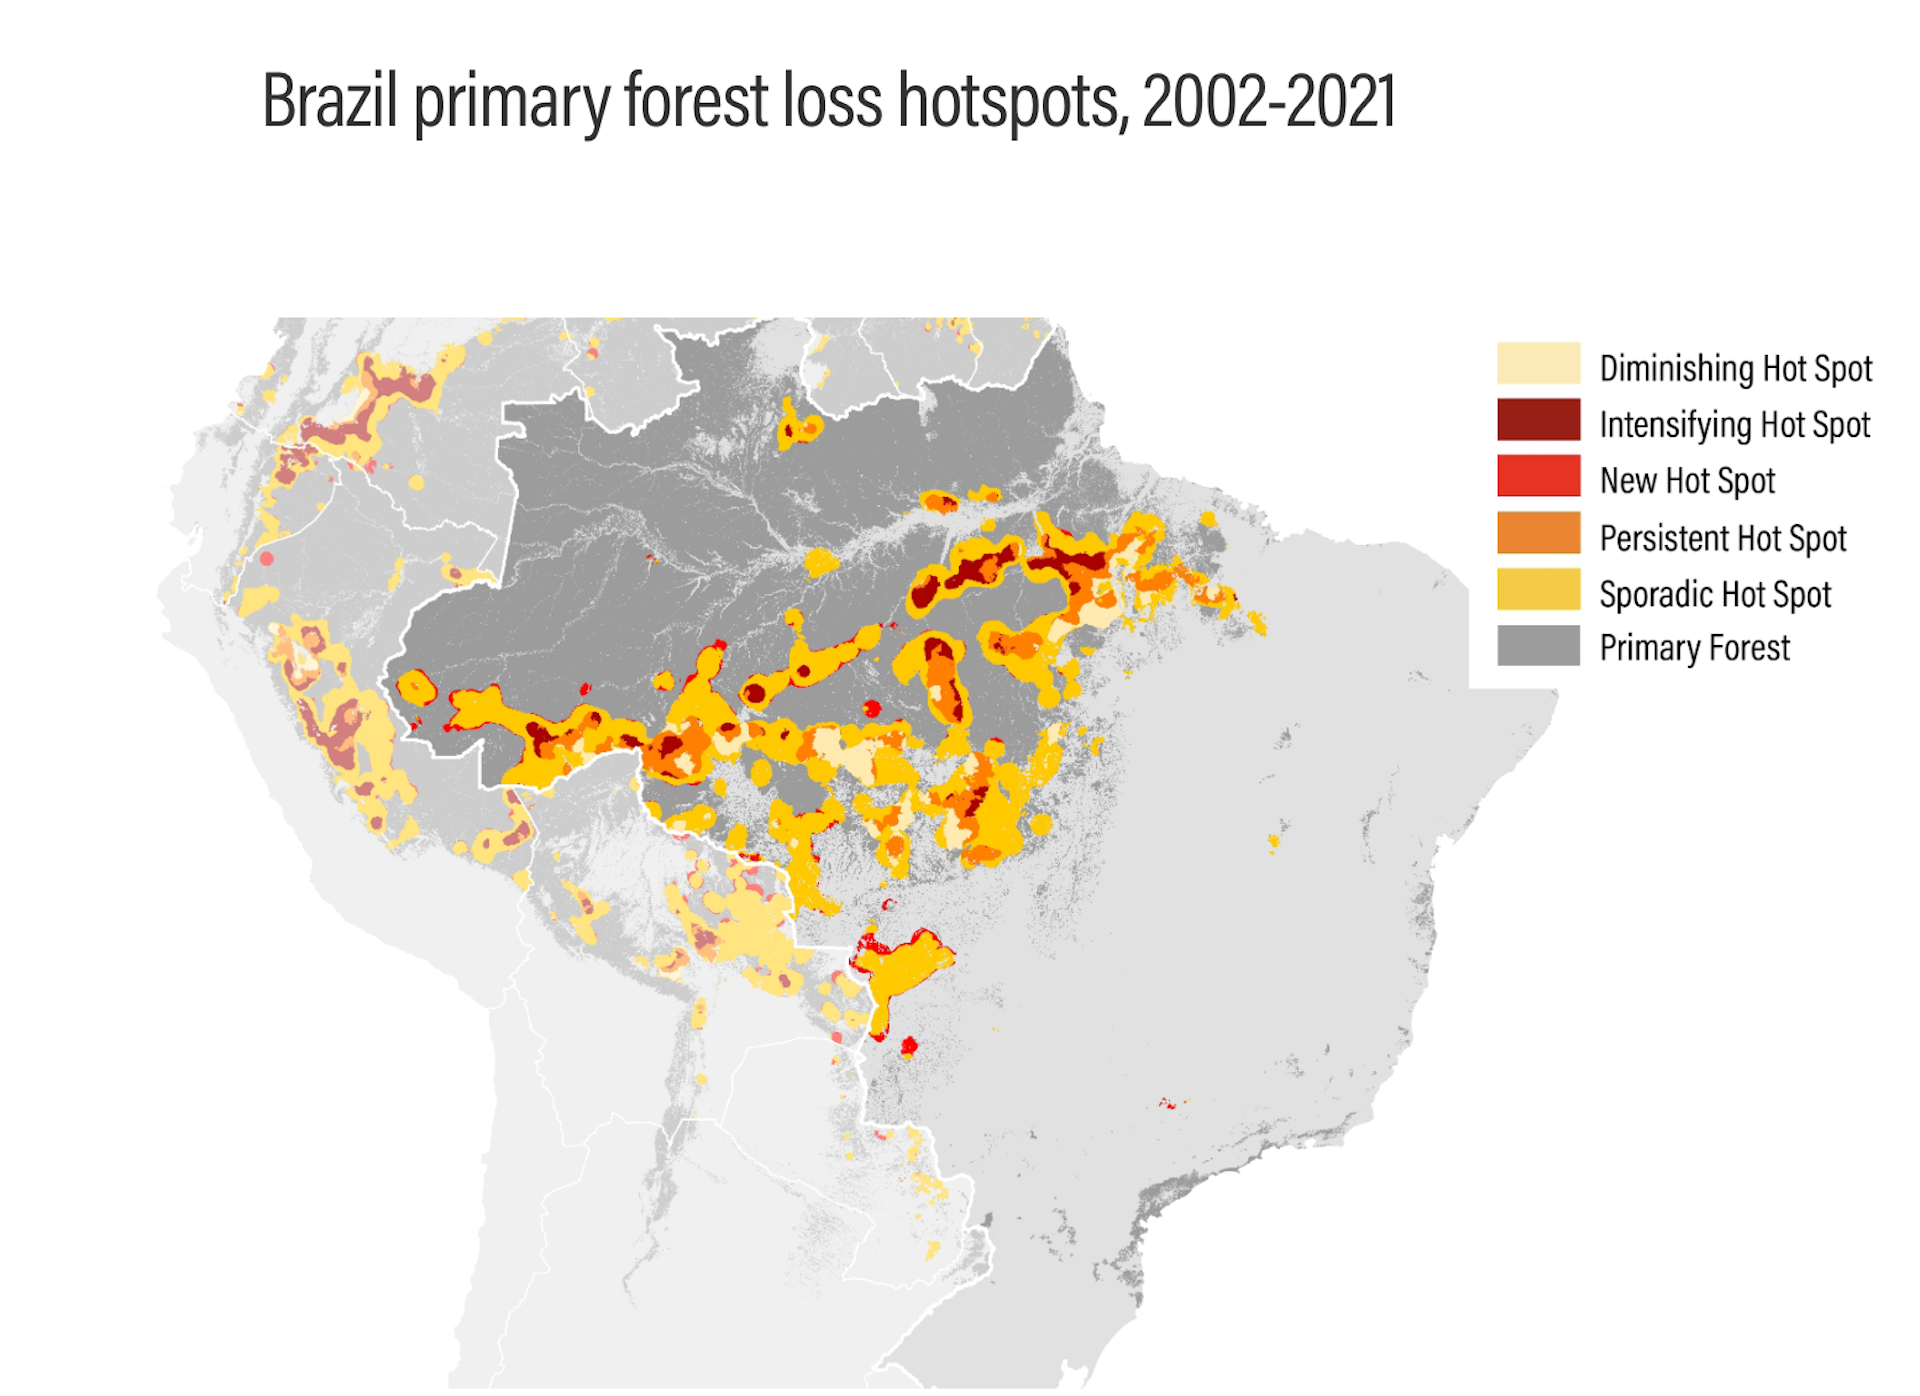 Forest loss hotspots in the Amazon rainforest in Brazil.